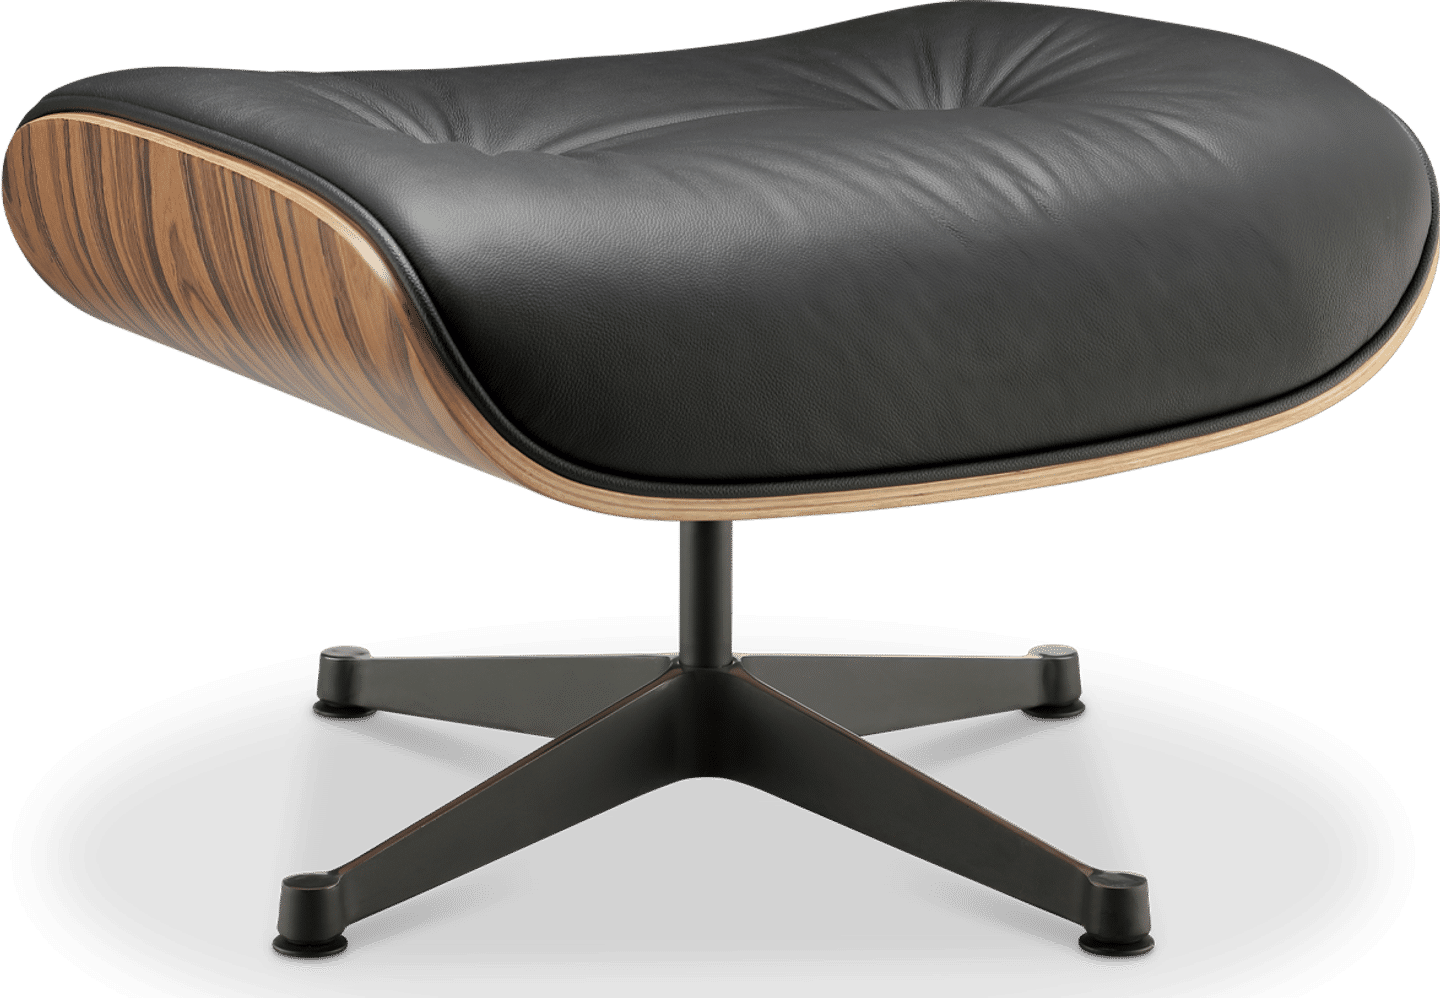 Eames Style Lounge Chair 670 pall Italian Leather/Black/Rosewood image.